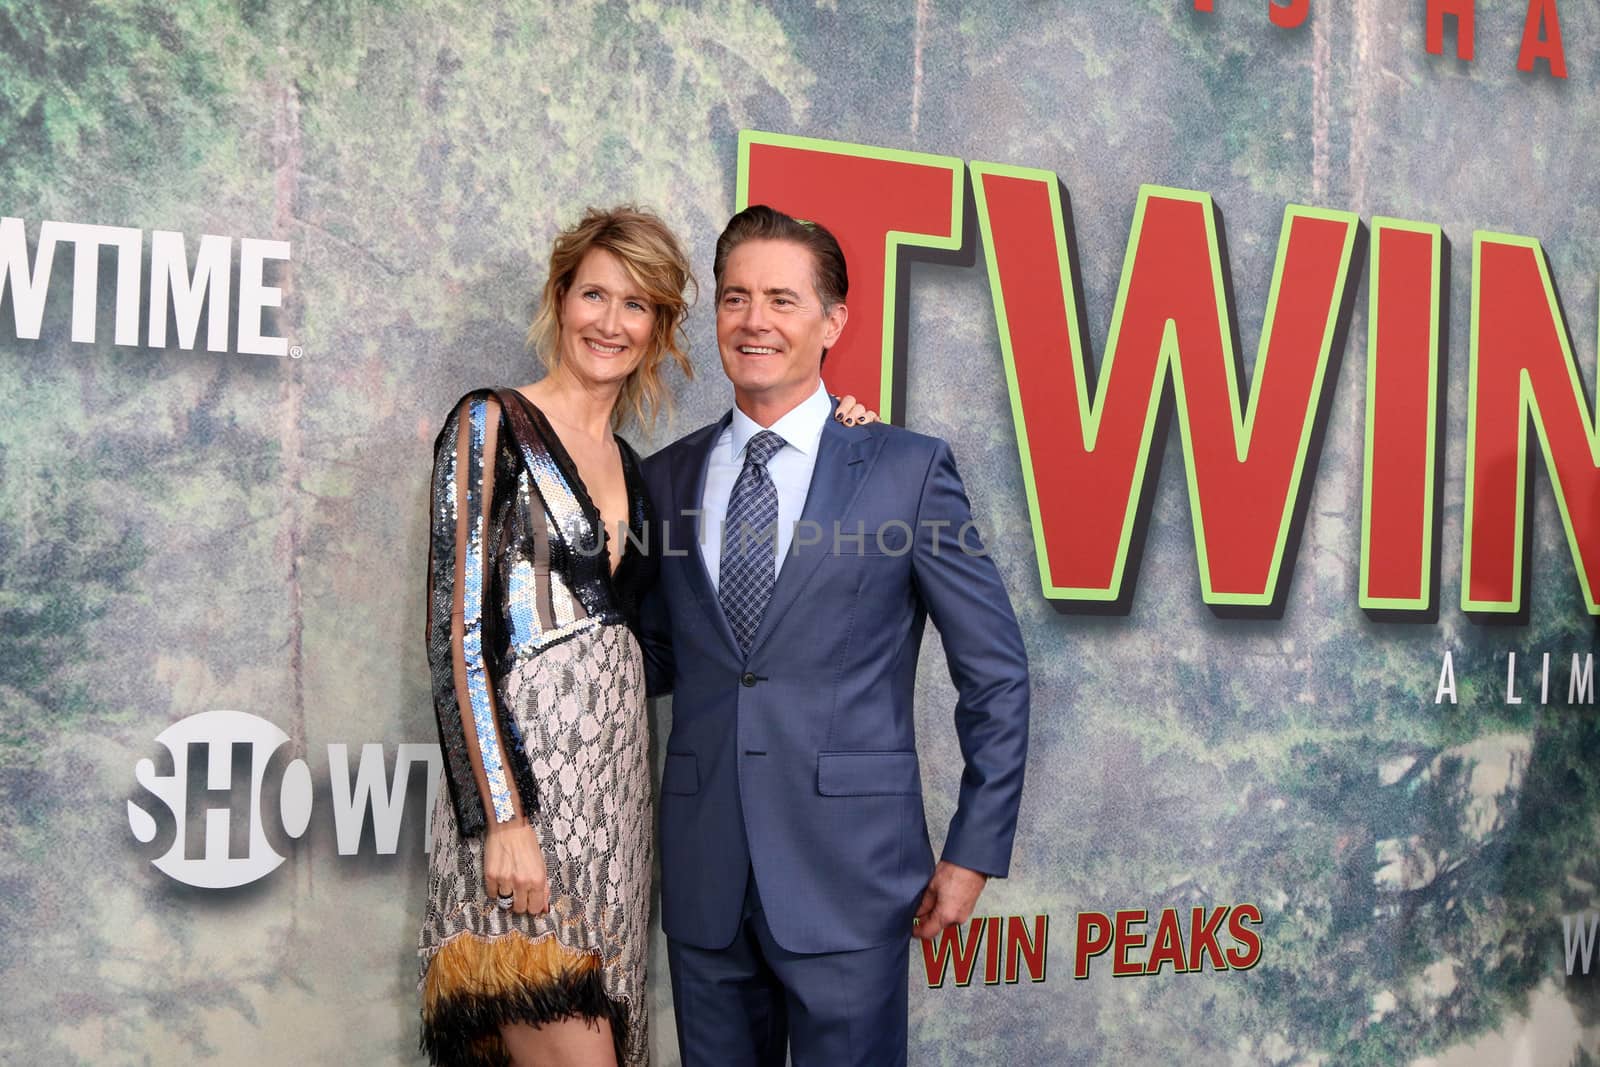 Laura Dern, Kyle MacLachlan
at the "Twin Peaks" Premiere Screening, The Theater at Ace Hotel, Los Angeles, CA 05-19-17/ImageCollect by ImageCollect